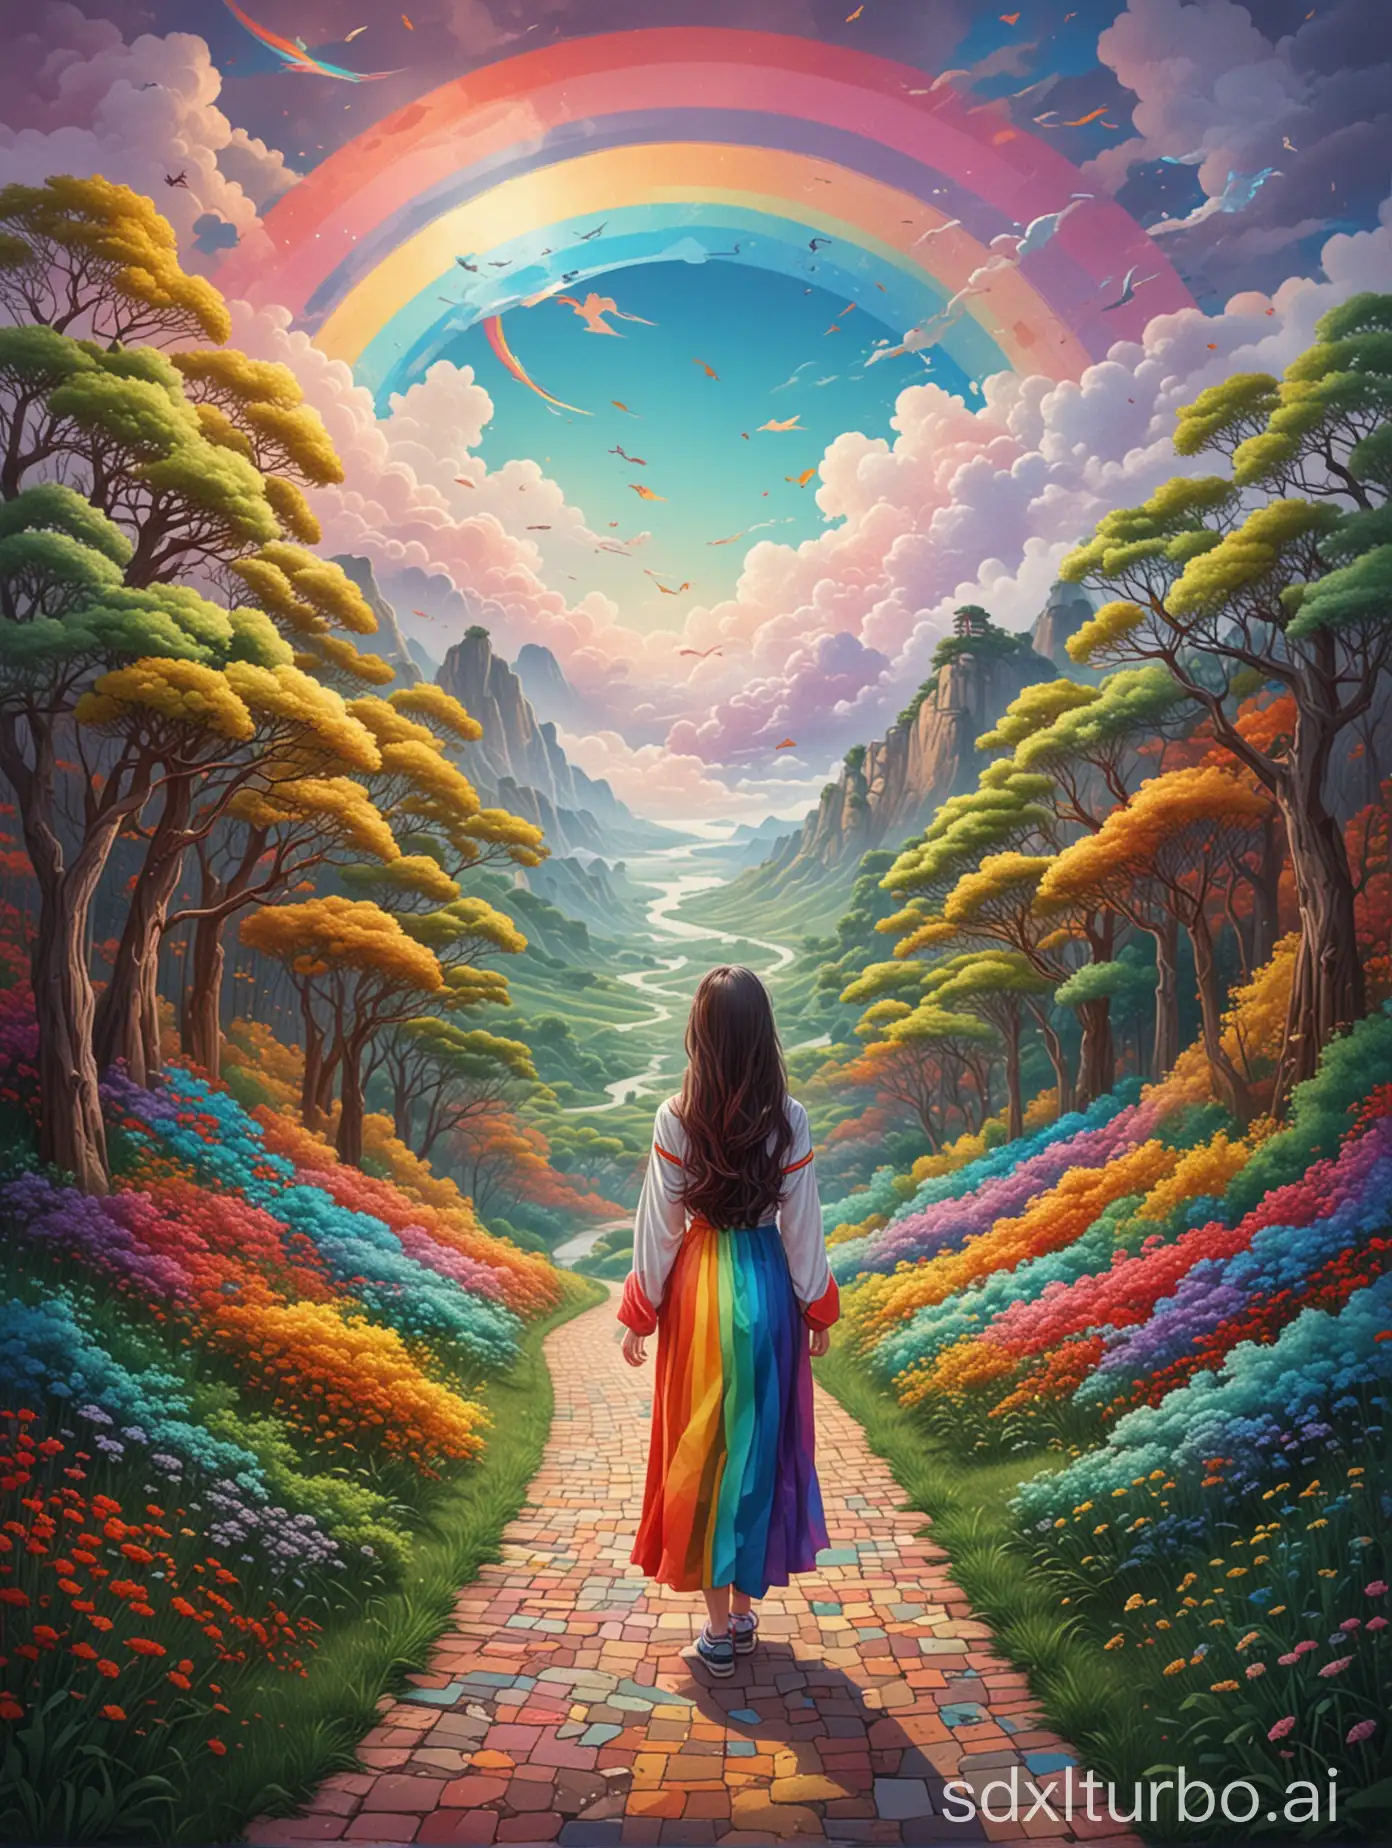 (masterpiece, best quality:1.2),art illustration, girl portrait, often neck, hair by clouds, Extra long hair paved with winding paths, Small silhouette on the path, Baiyun, rainbow, The composition, stitching, trees, rainbow, Contrasting colors, in the spring landscape, Abstract surreal colors,rich and colorful, popular geometric surrealism, rainbow色的梦想, icon design, Rozmin trip, vector art,